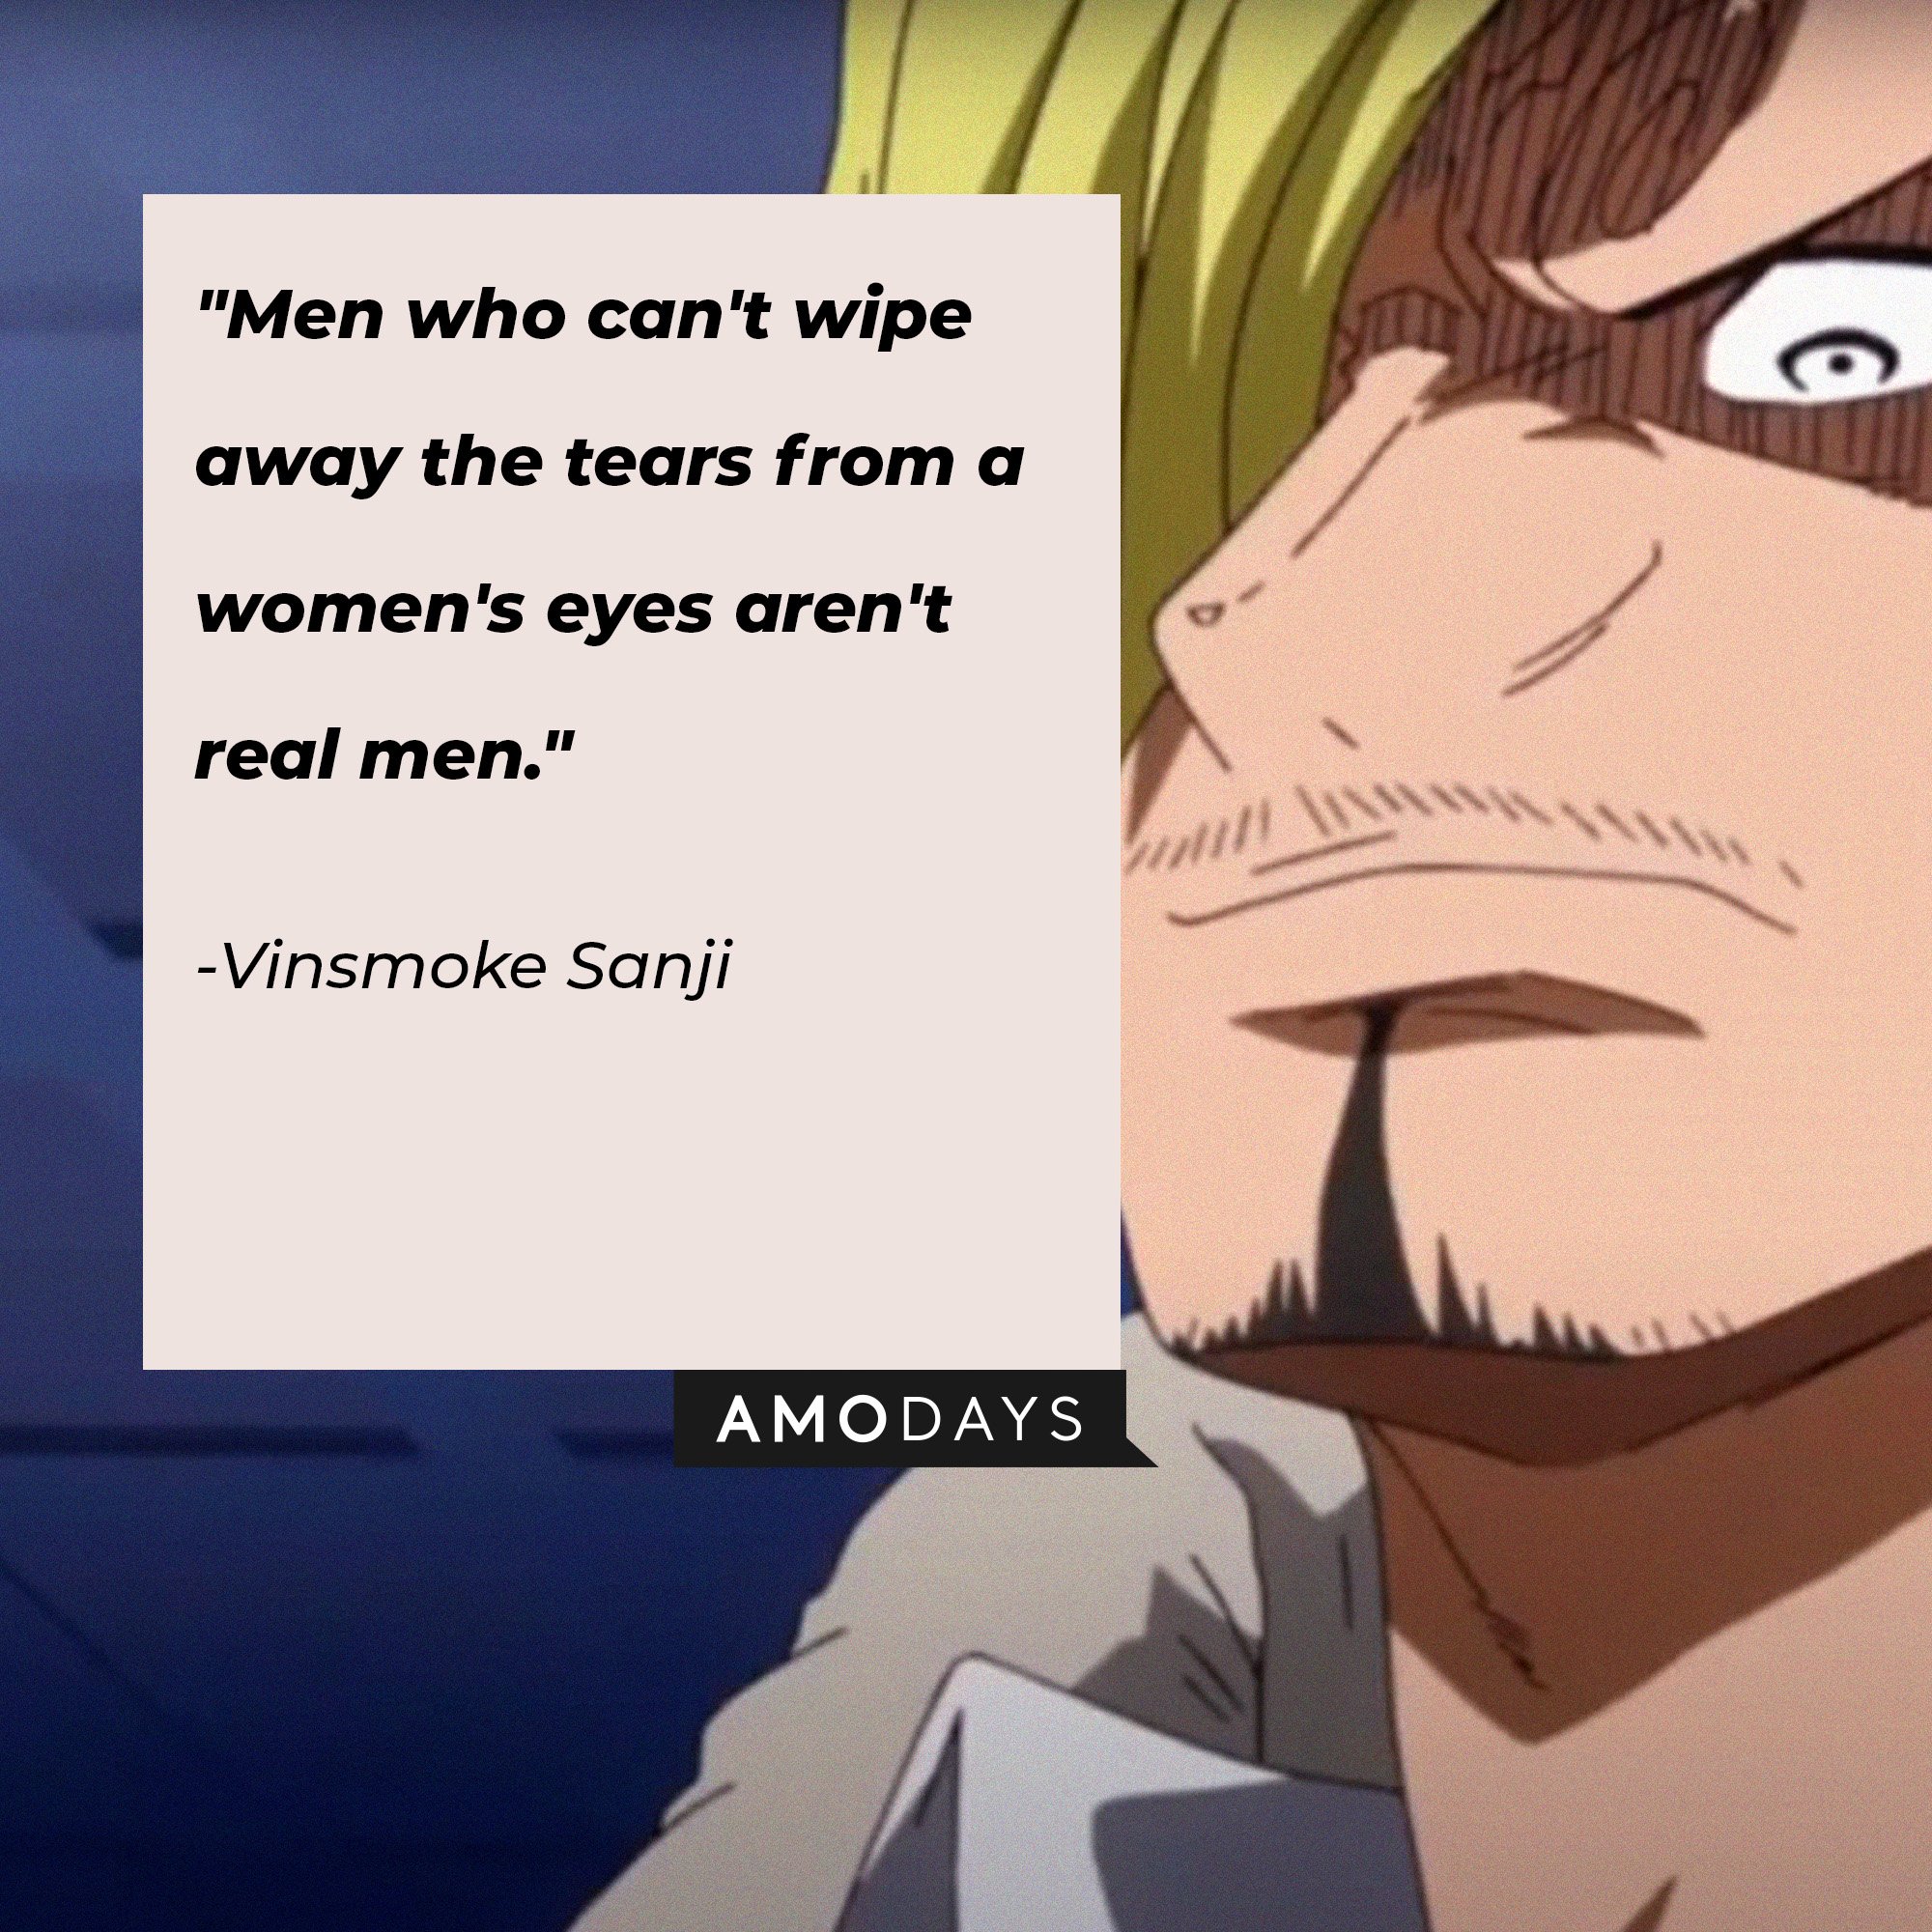 Vinsmoke Sanji's quote: "Men who can't wipe away the tears from a women's eyes aren't real men." | Image: AmoDays